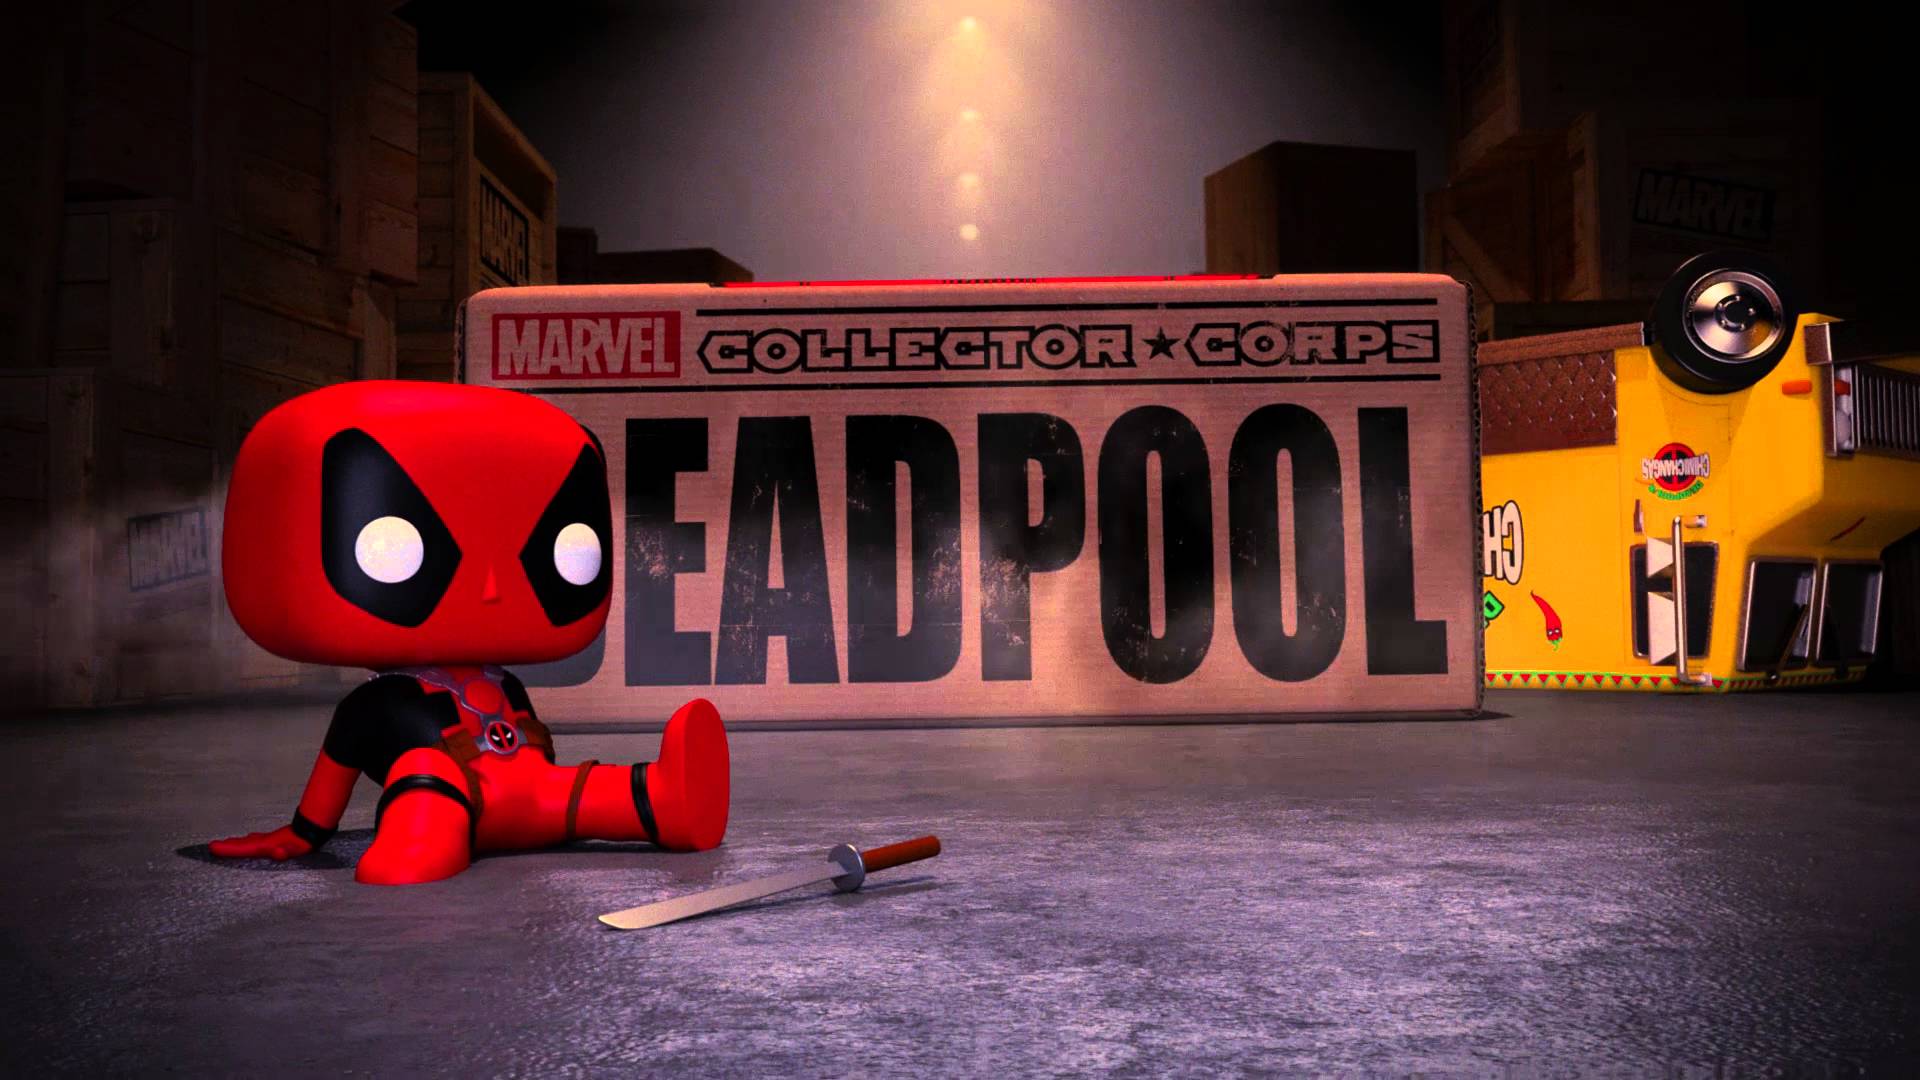 Collectorcorps: Deadpool